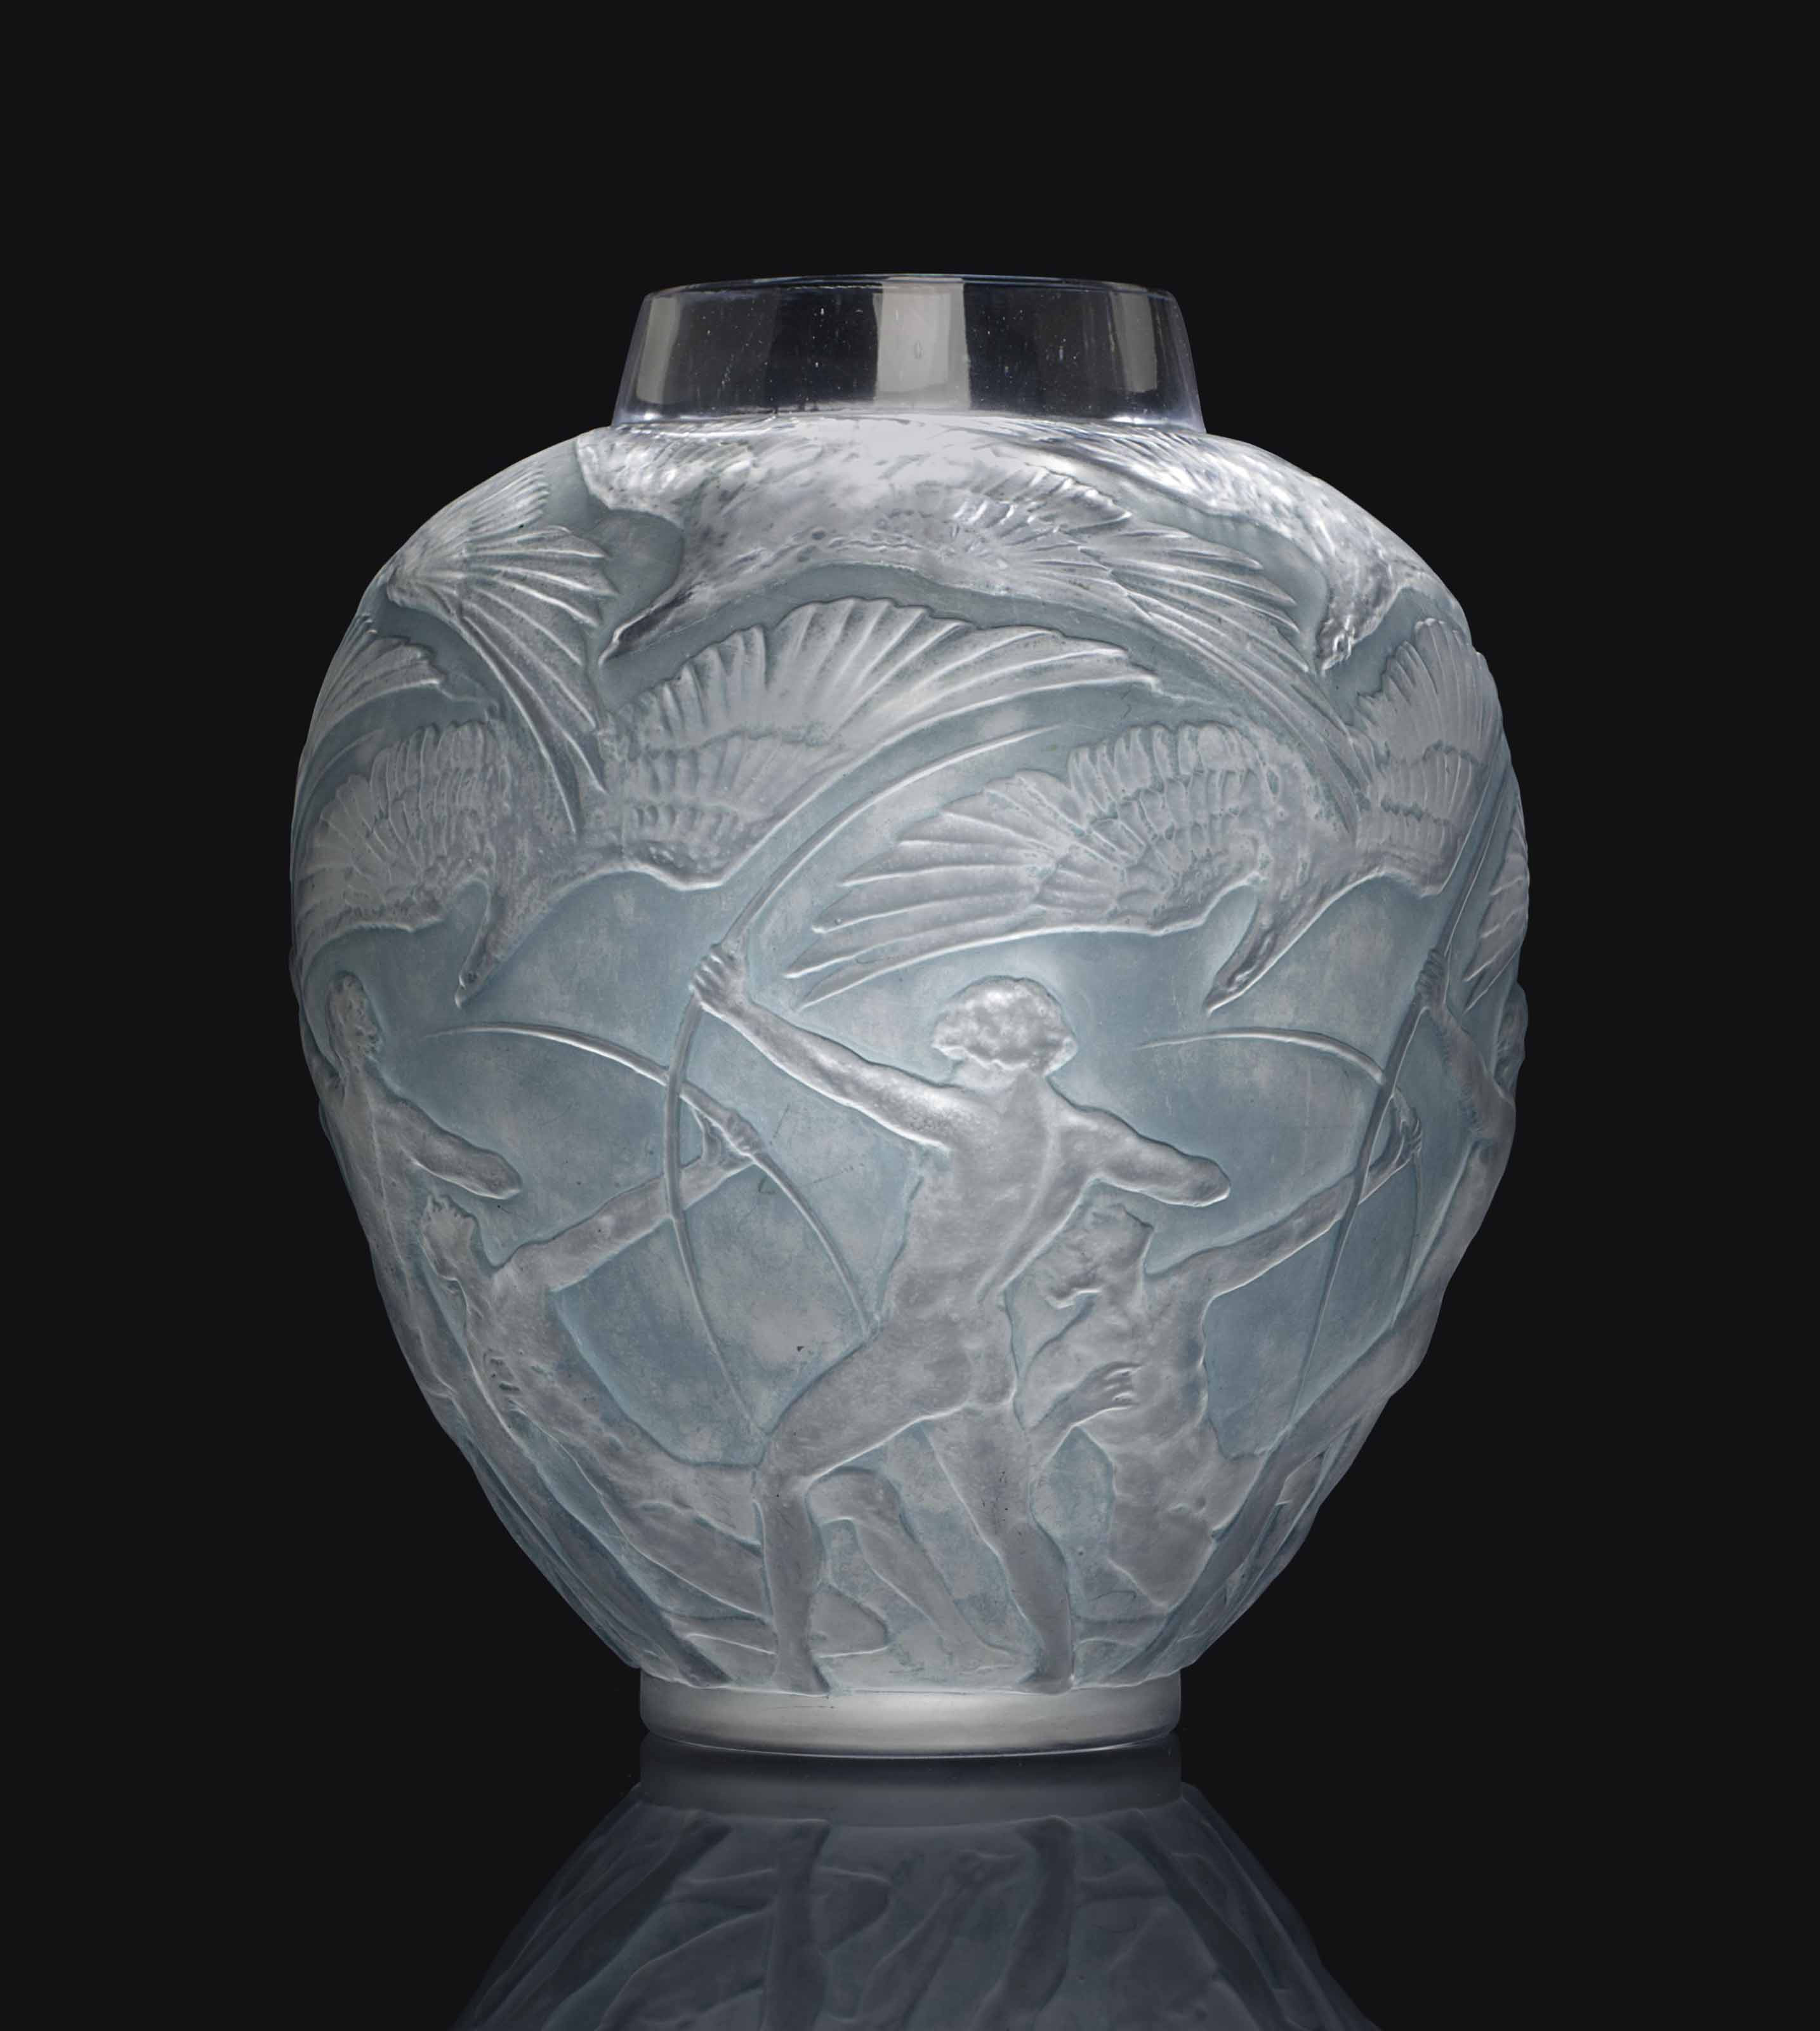 12 Recommended Lalique Dove Vase 2024 free download lalique dove vase of rene lalique 1860 1945 an archers vase model introduced 1921 regarding lot 326